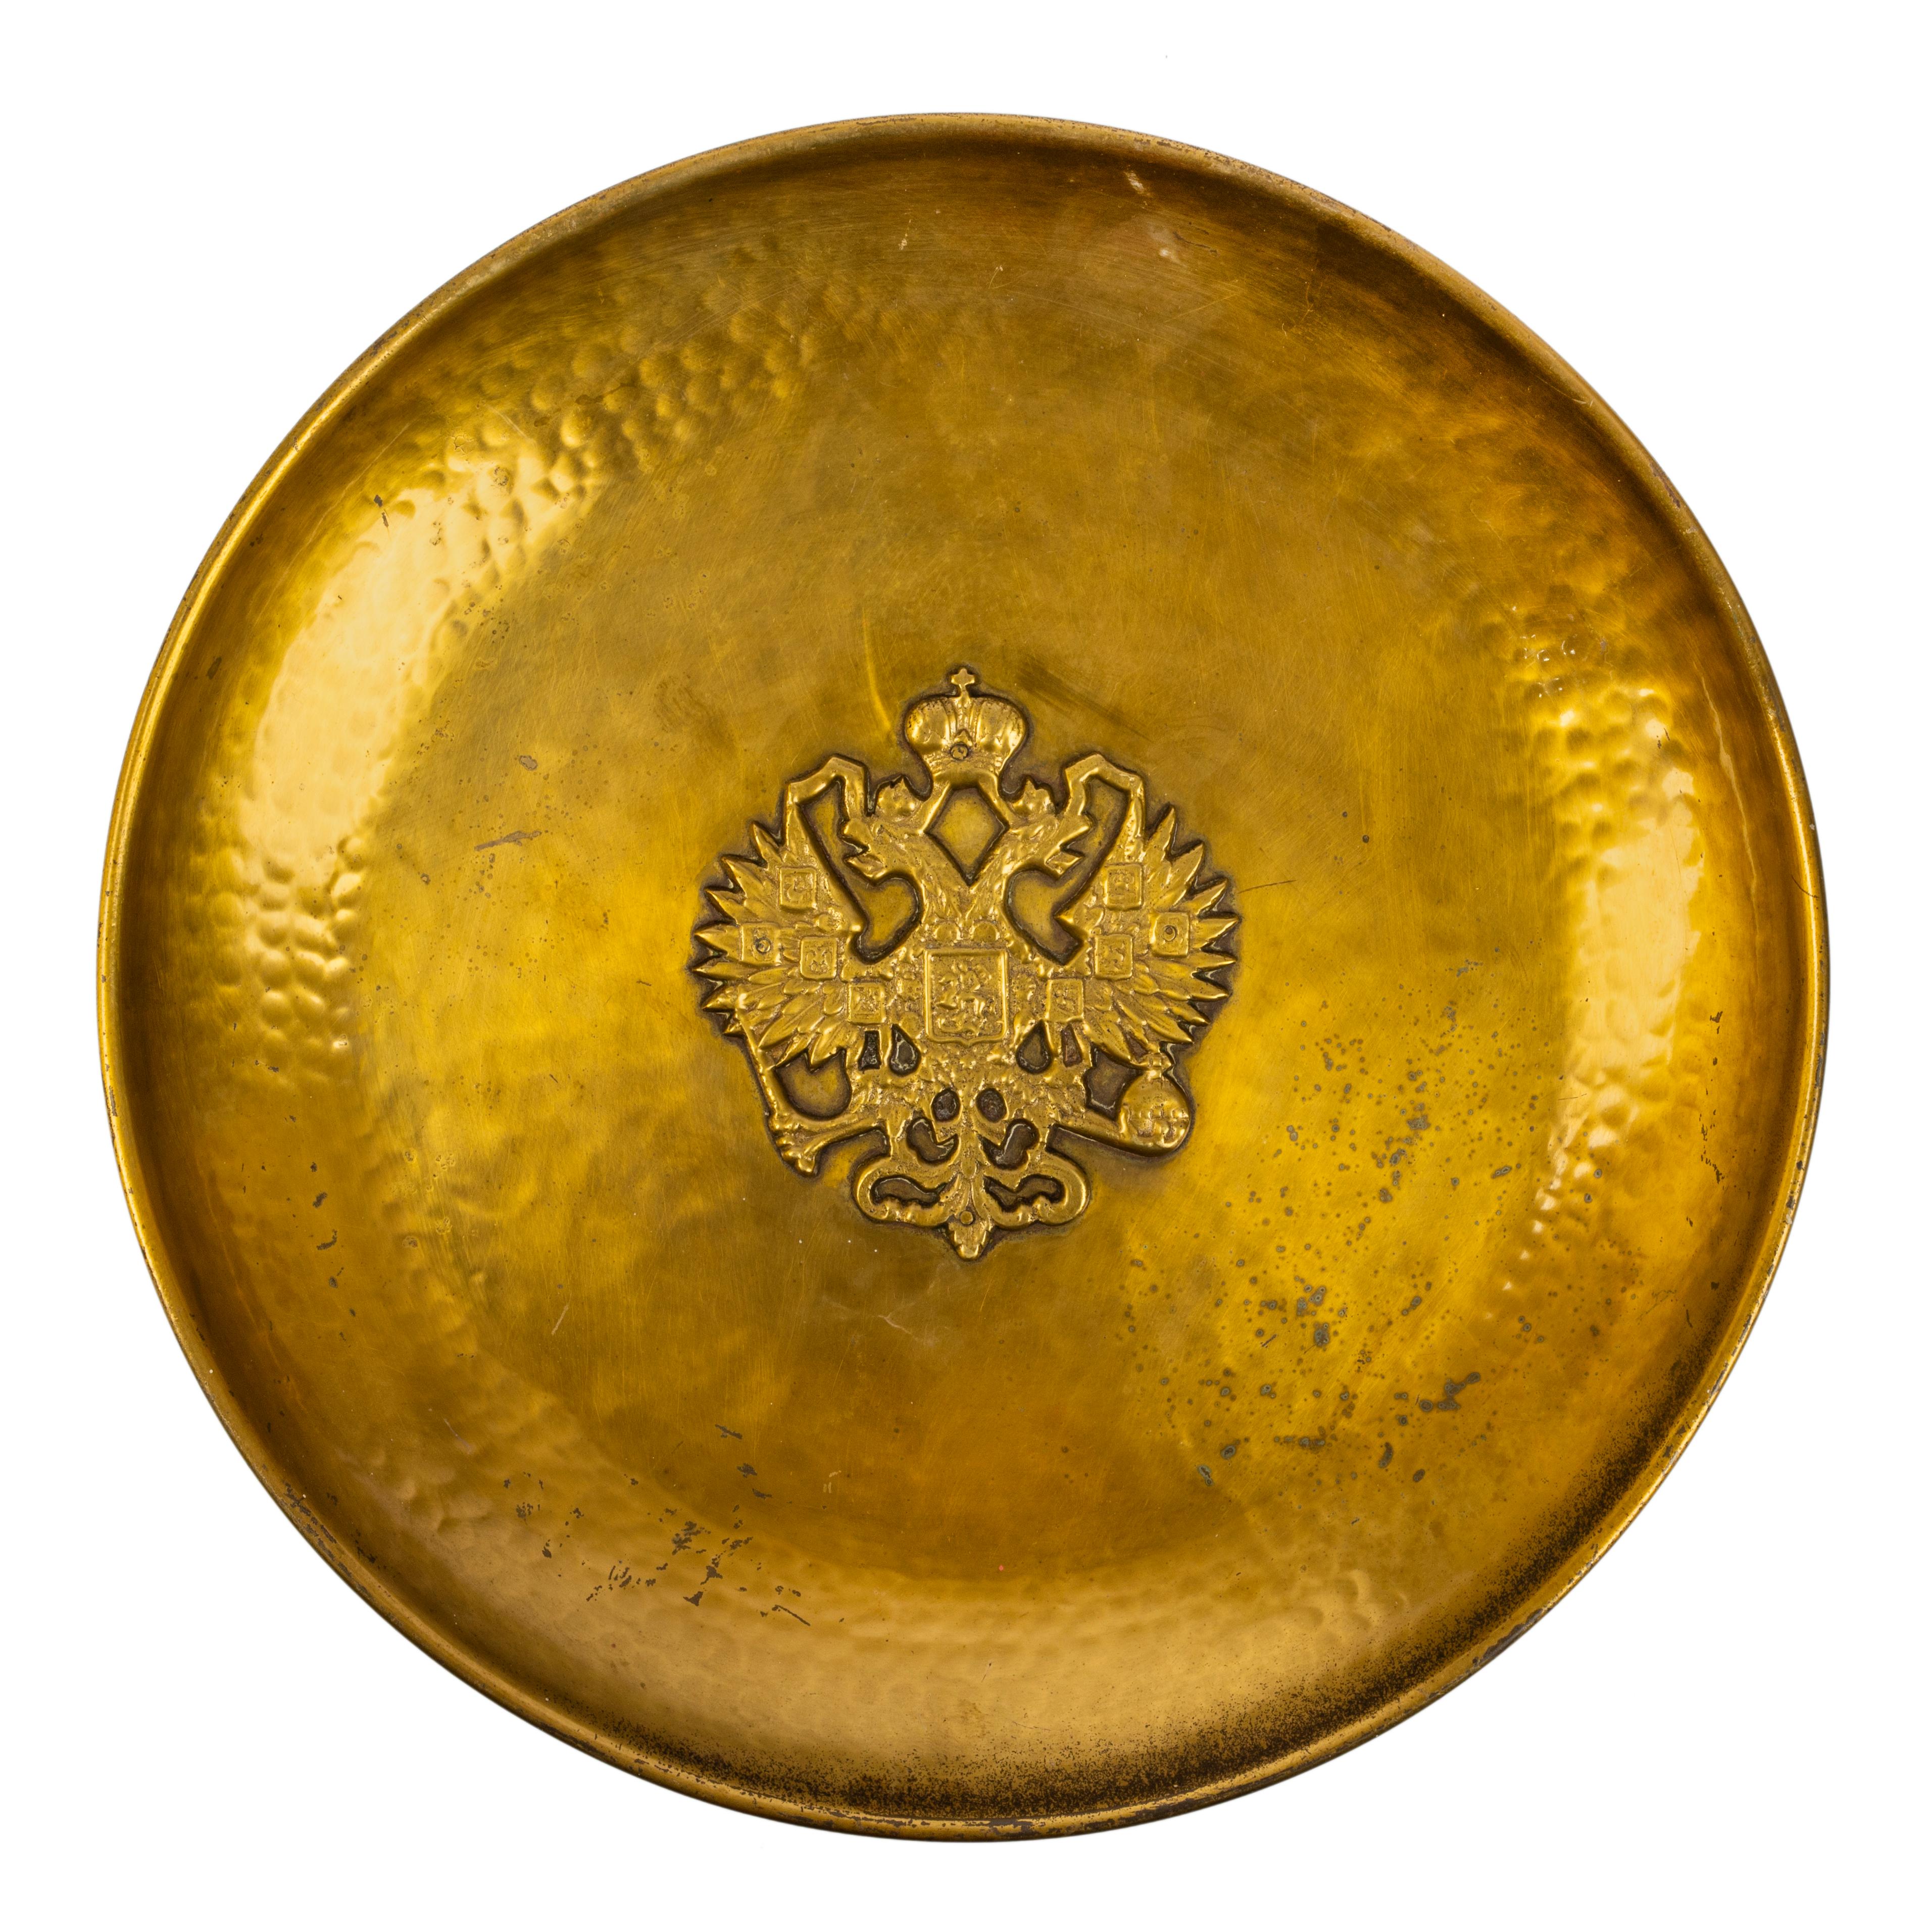 In the Russian style, a large circular brass serving plate with everted rim, of overall hand hammered design, the center applied with a Russian double headed Romanov eagle holding orb and scepter, enclosing the shield of St. George Slaying the